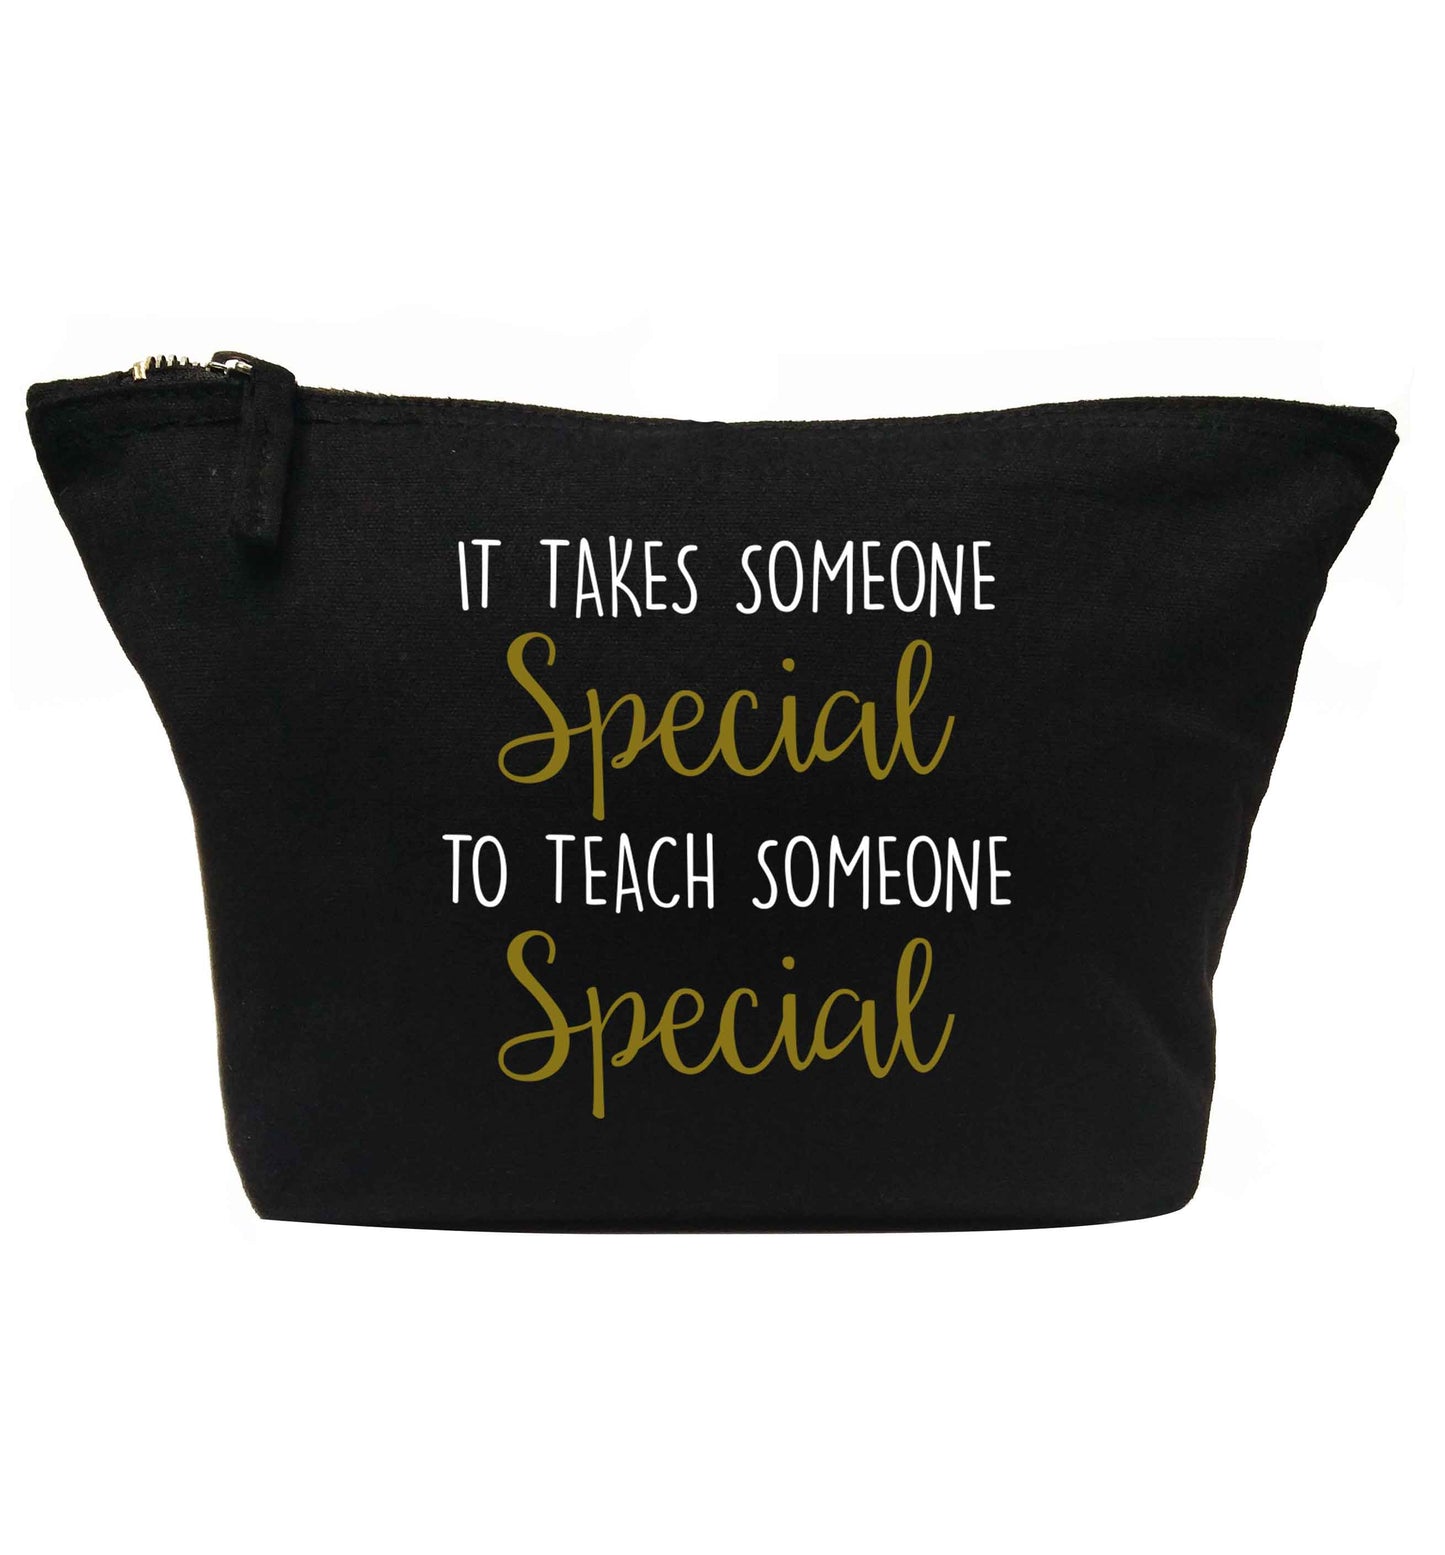 It takes someone special to teach someone special | Makeup / wash bag